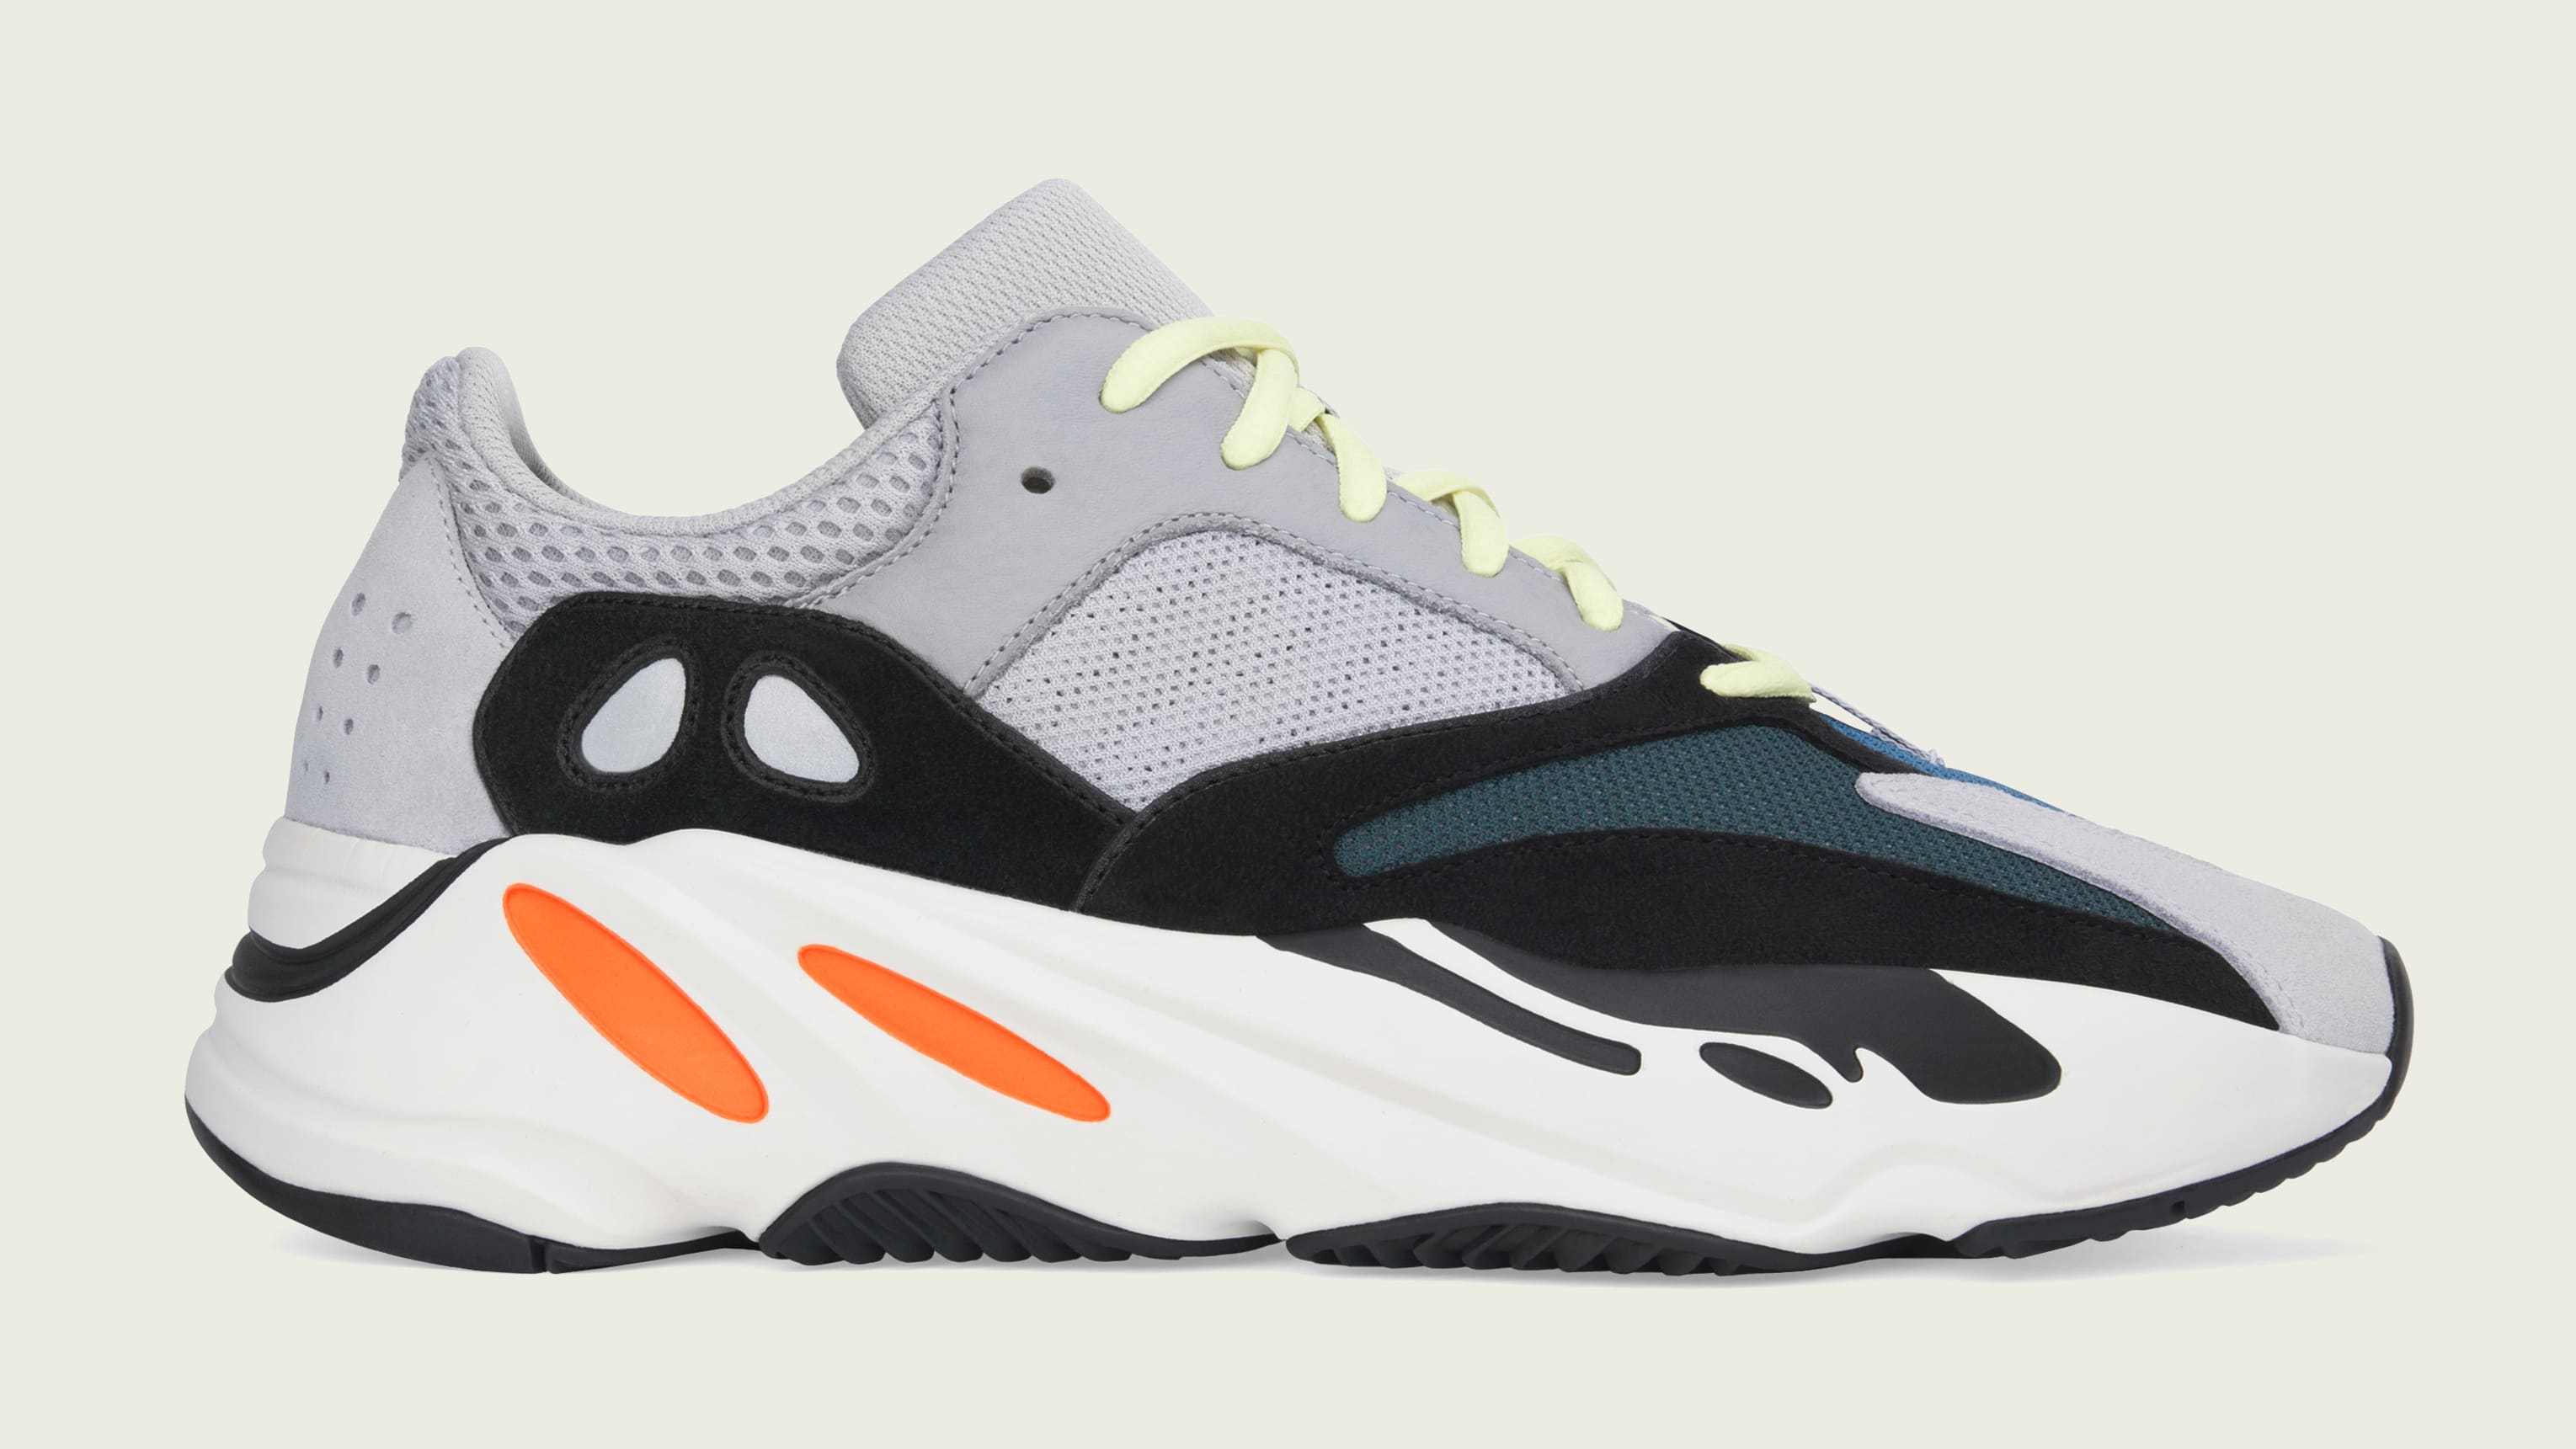 Adidas Yeezy Boost 700 &#x27;Wave Runner&#x27; B75571 (Lateral)